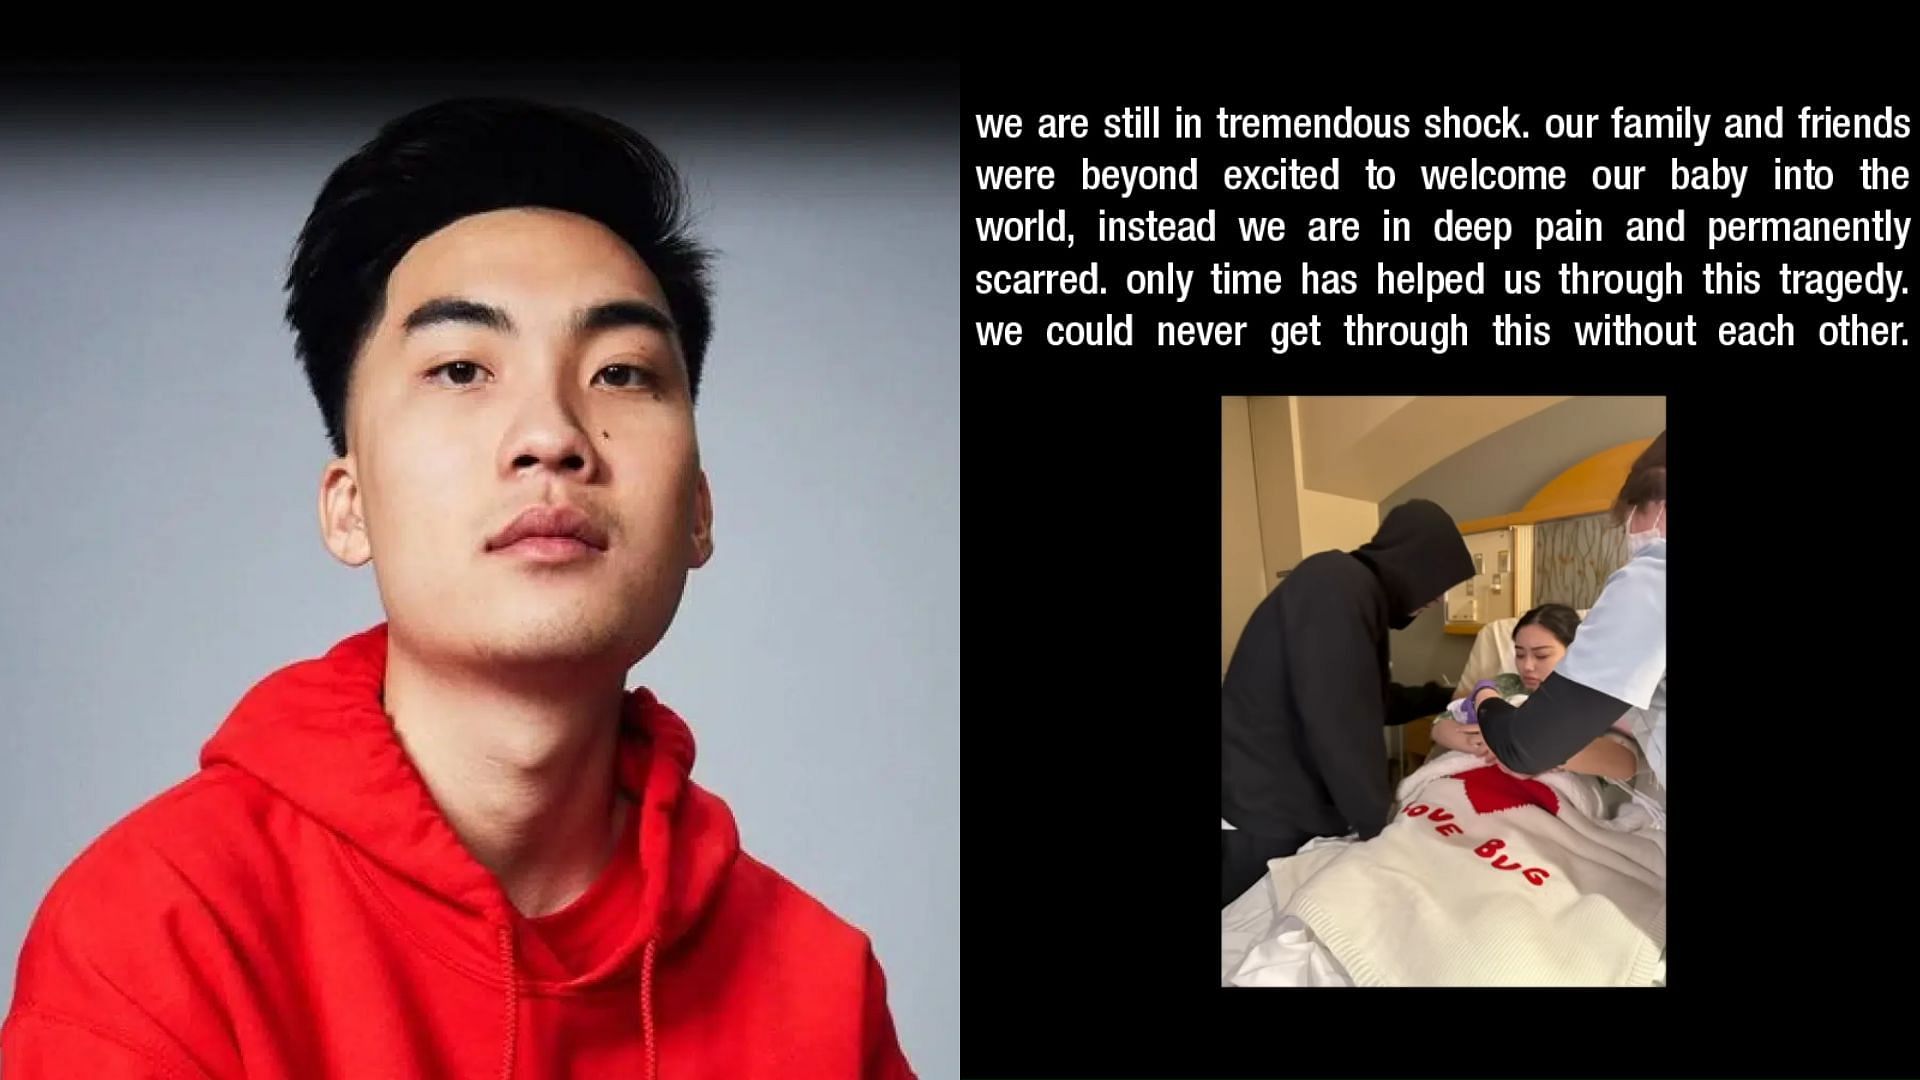 RiceGum announces his firstborn dying in the womb (image via Sportskeeda)